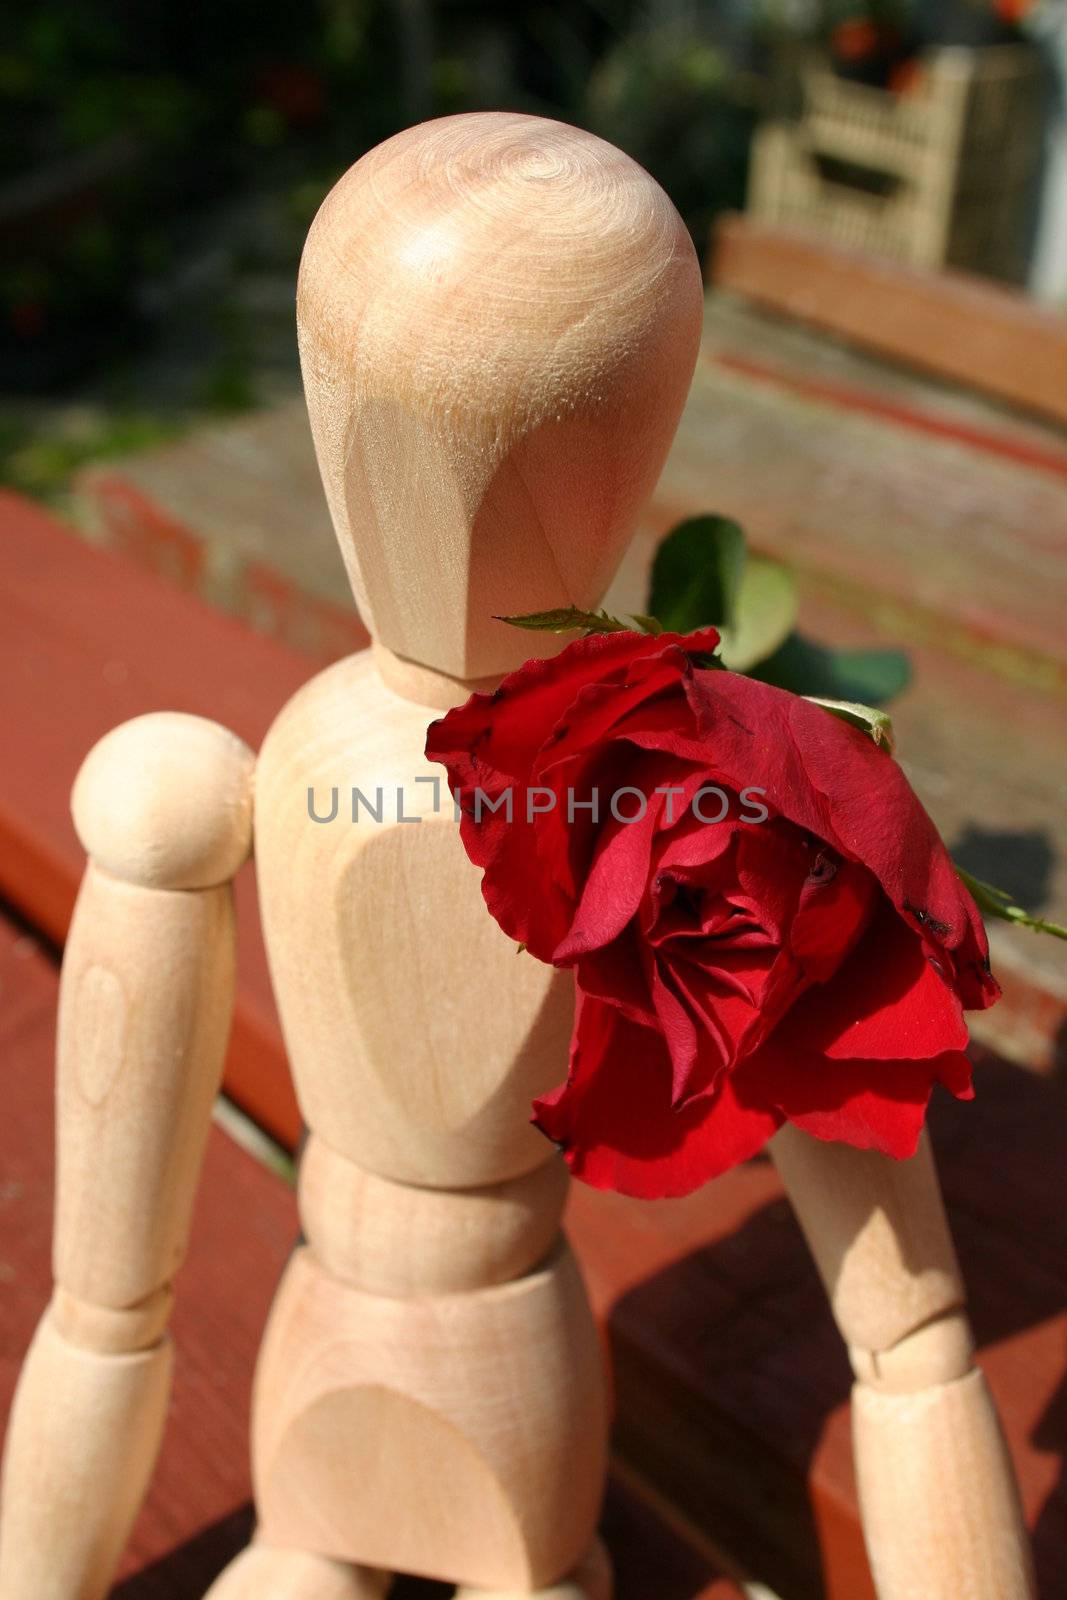 wearing a red rose   by leafy